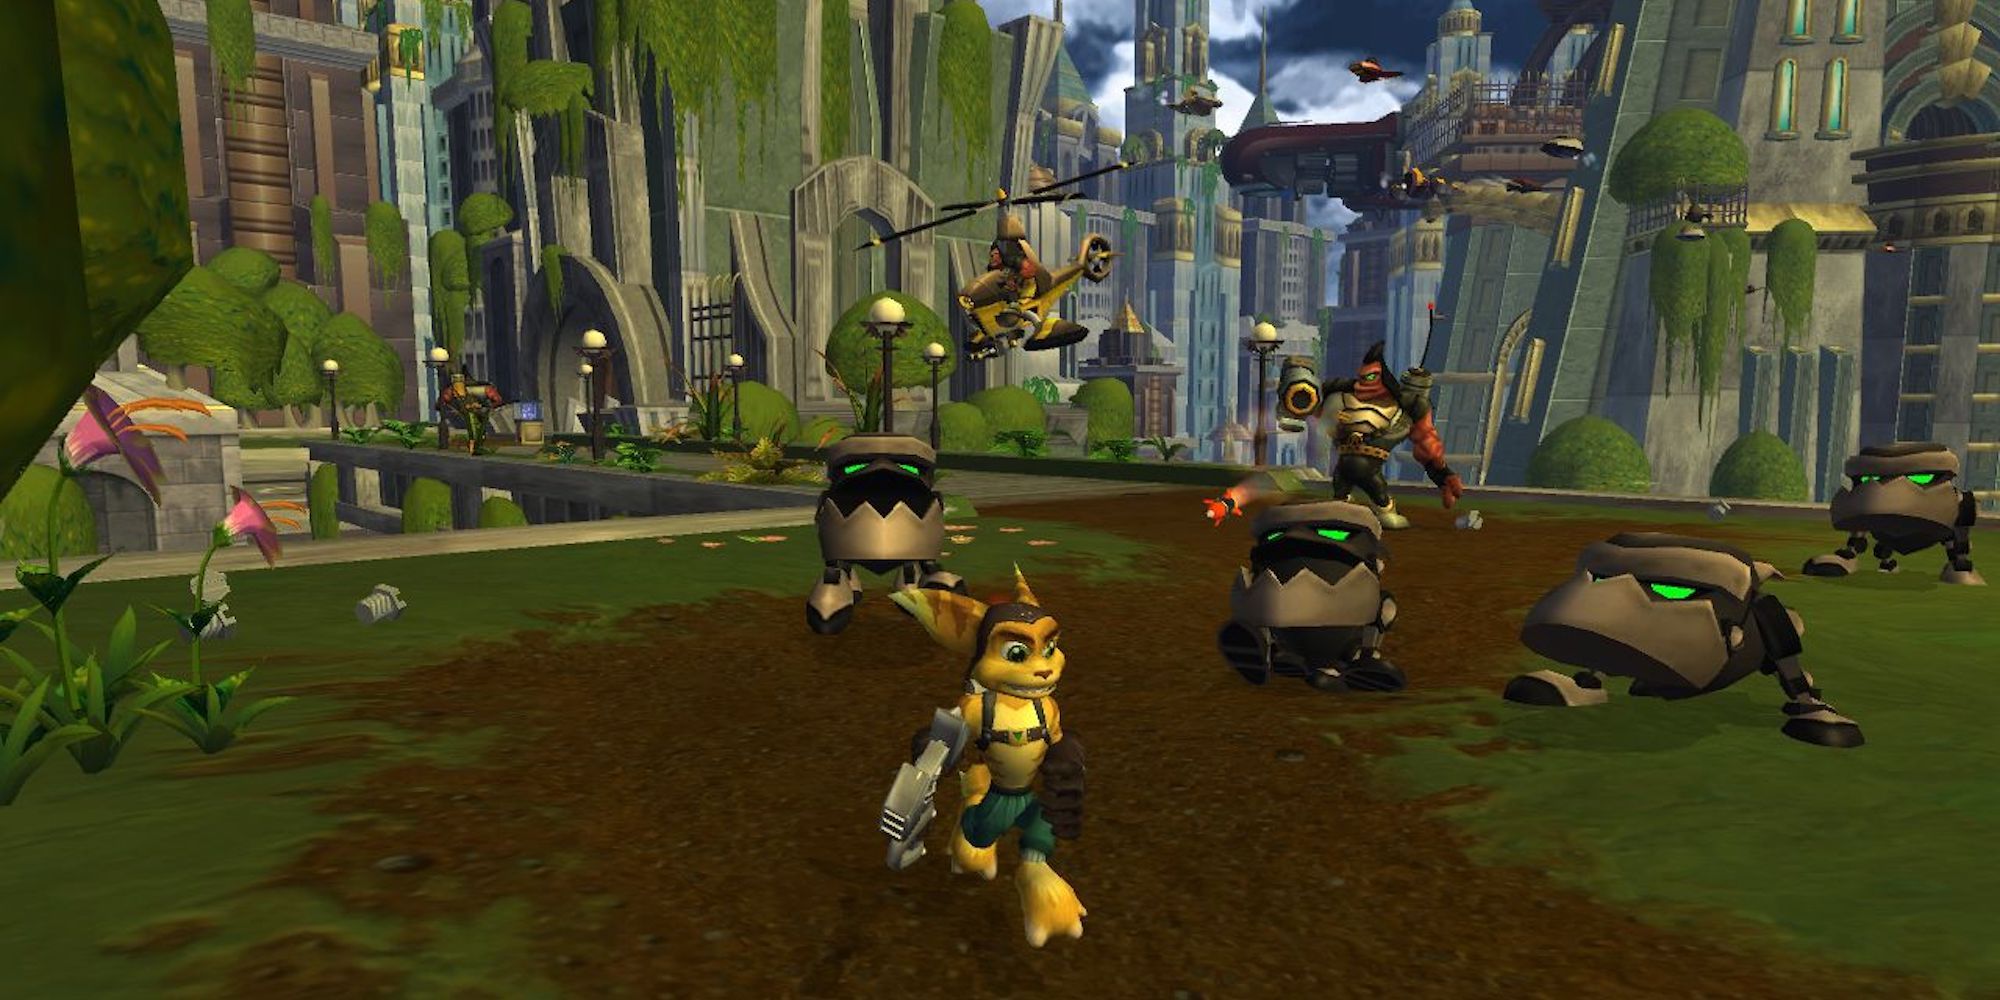 Ratchet and clank chased by enemies